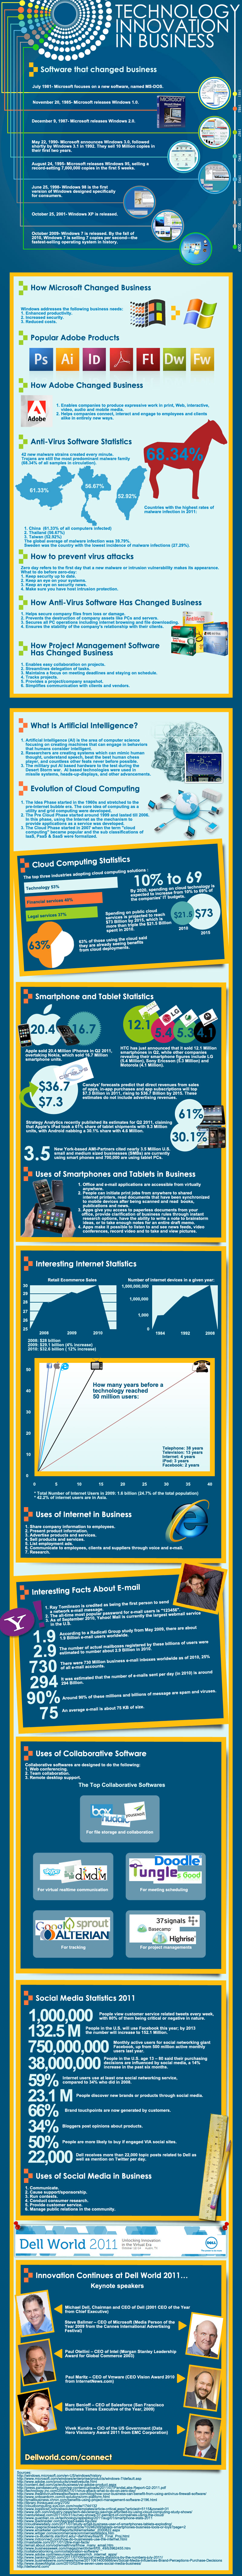 Technology for Business-Infographic